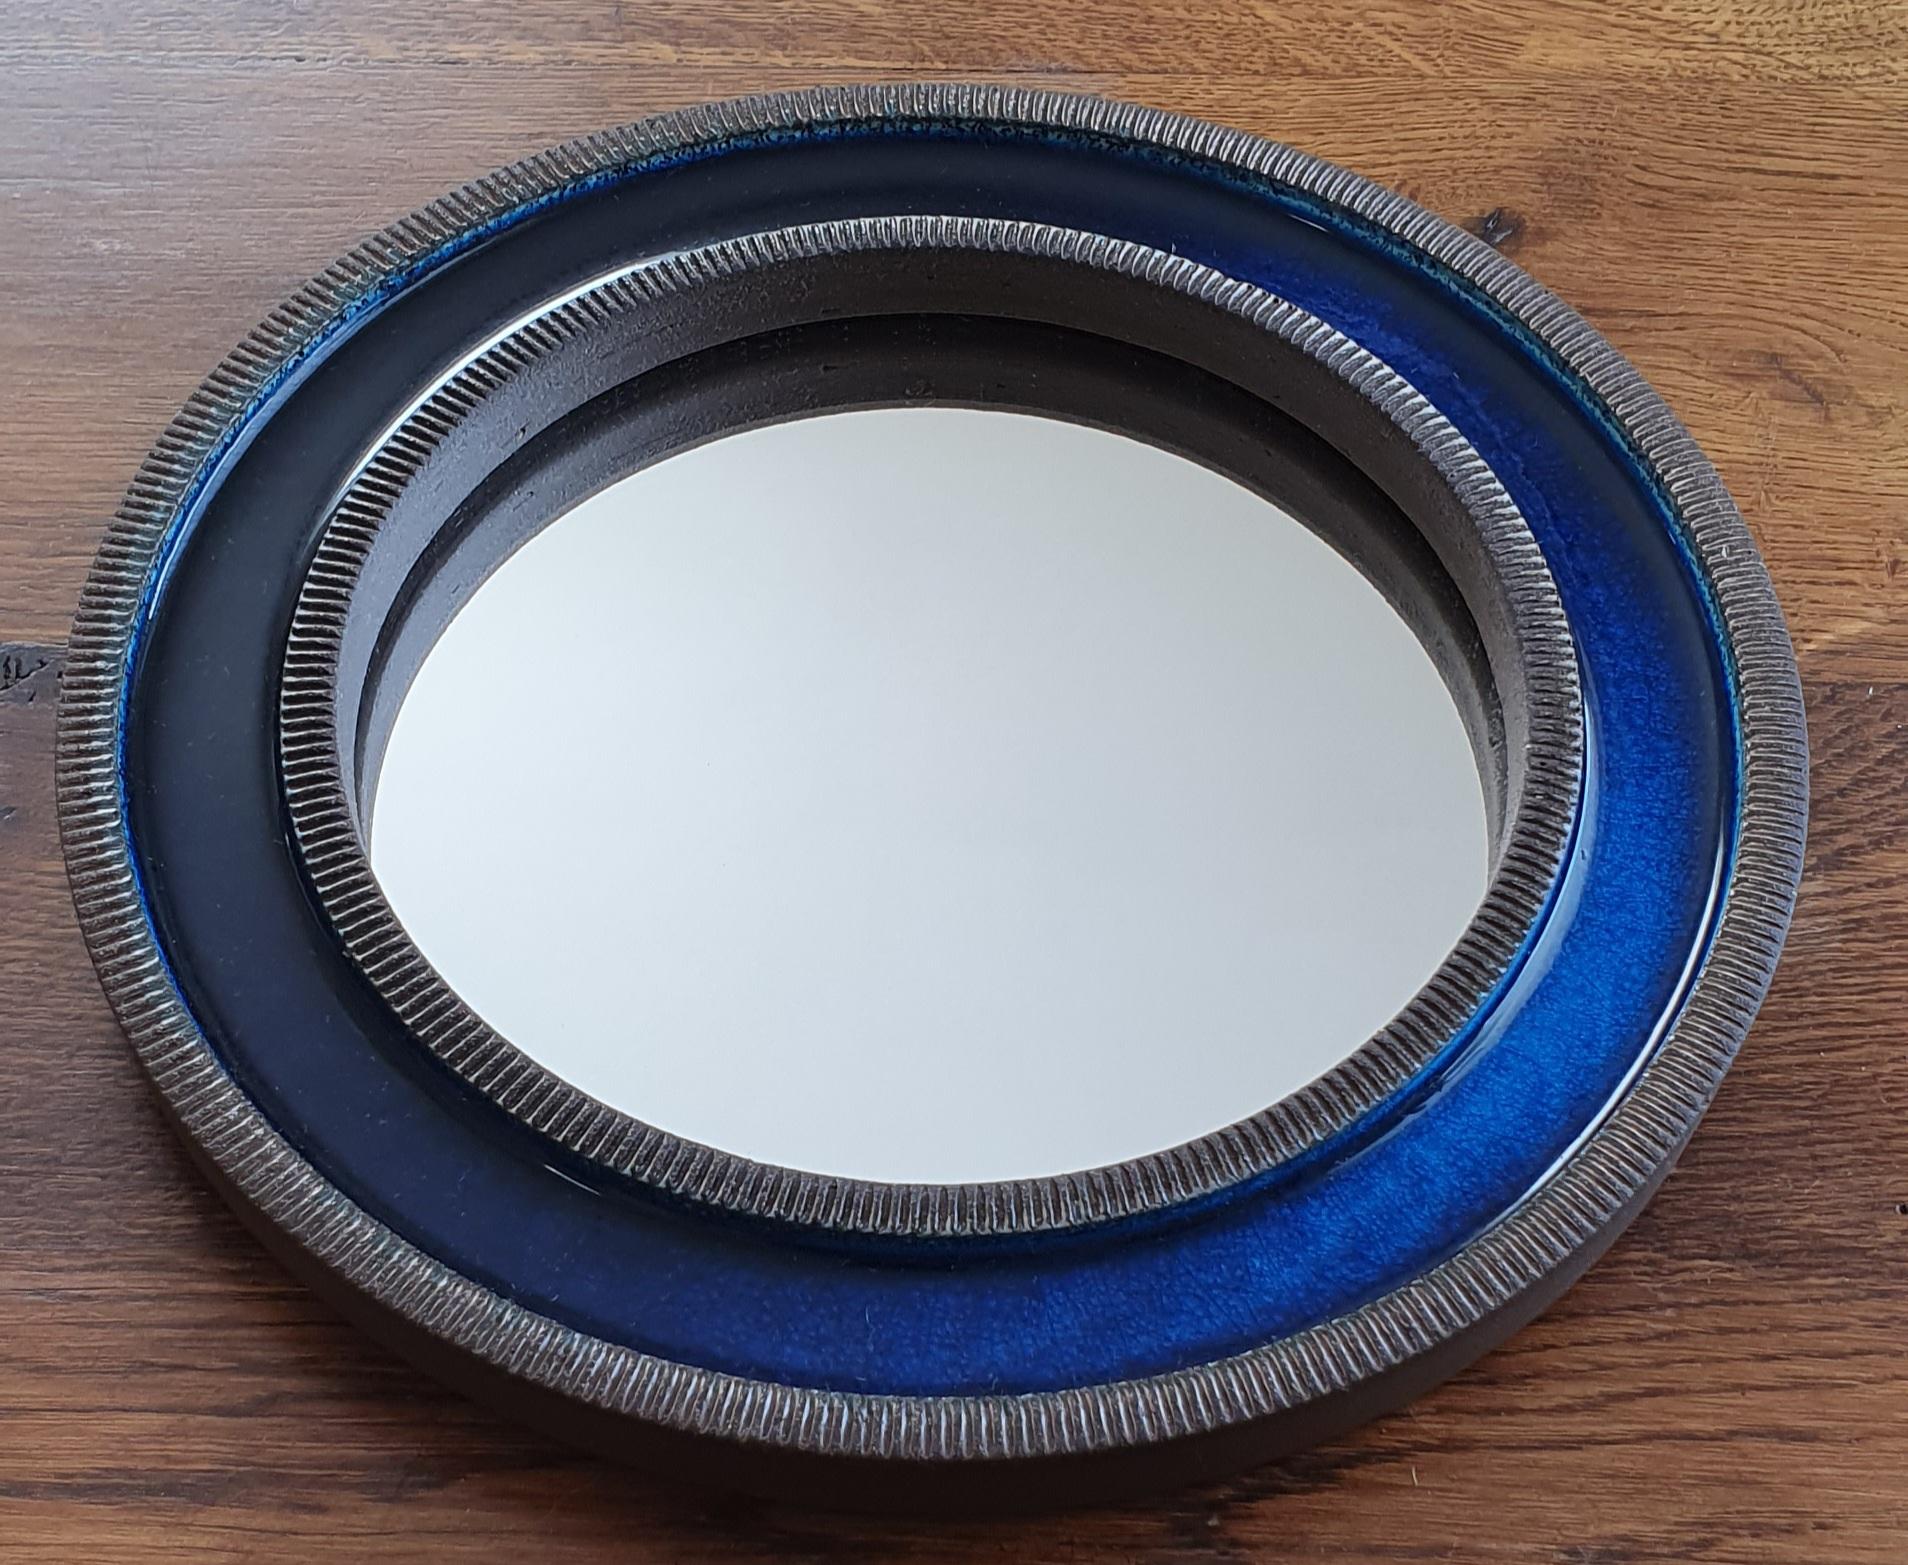 Blue midcentury round ceramic wall mirror designed by Erik Reiff for Danish Knabstrup. The mirror is made of glazed ceramic and has alternating rings with a ceramic ribbed edge and a smooth blue crystalline glaze on the inside. Original metal hook